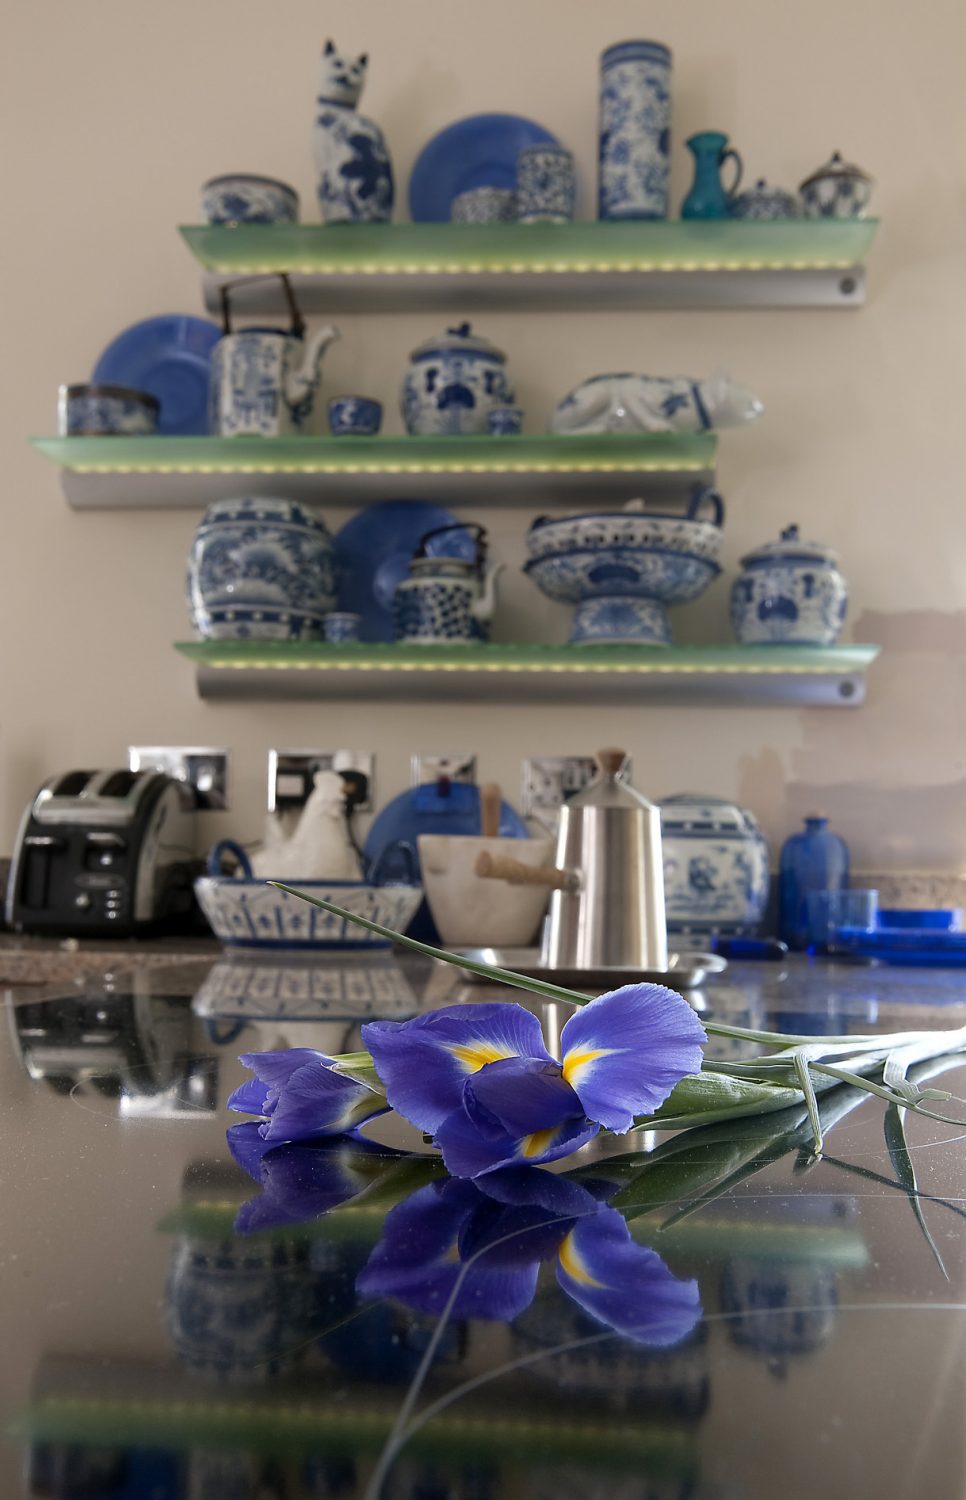 In the kitchen, shelves of blue and white Thai china dominate one wall. “We won quite a few of these pieces at bridge games in Thailand, and as we had so many of them, they rather dictated the colour scheme in this room,” says Mike